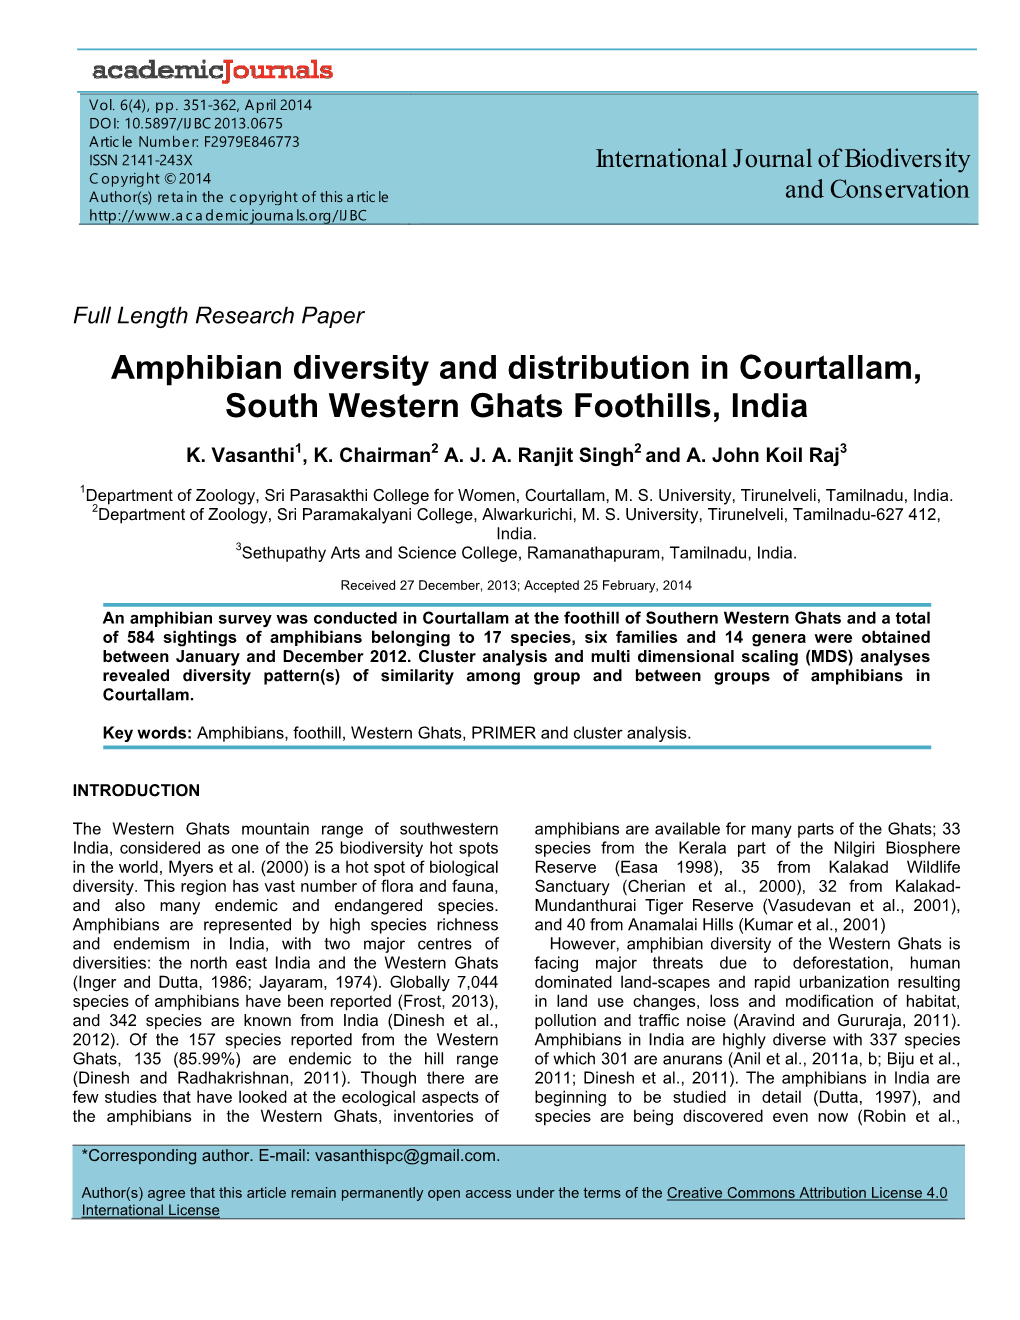 Amphibian Diversity and Distribution in Courtallam, South Western Ghats Foothills, India